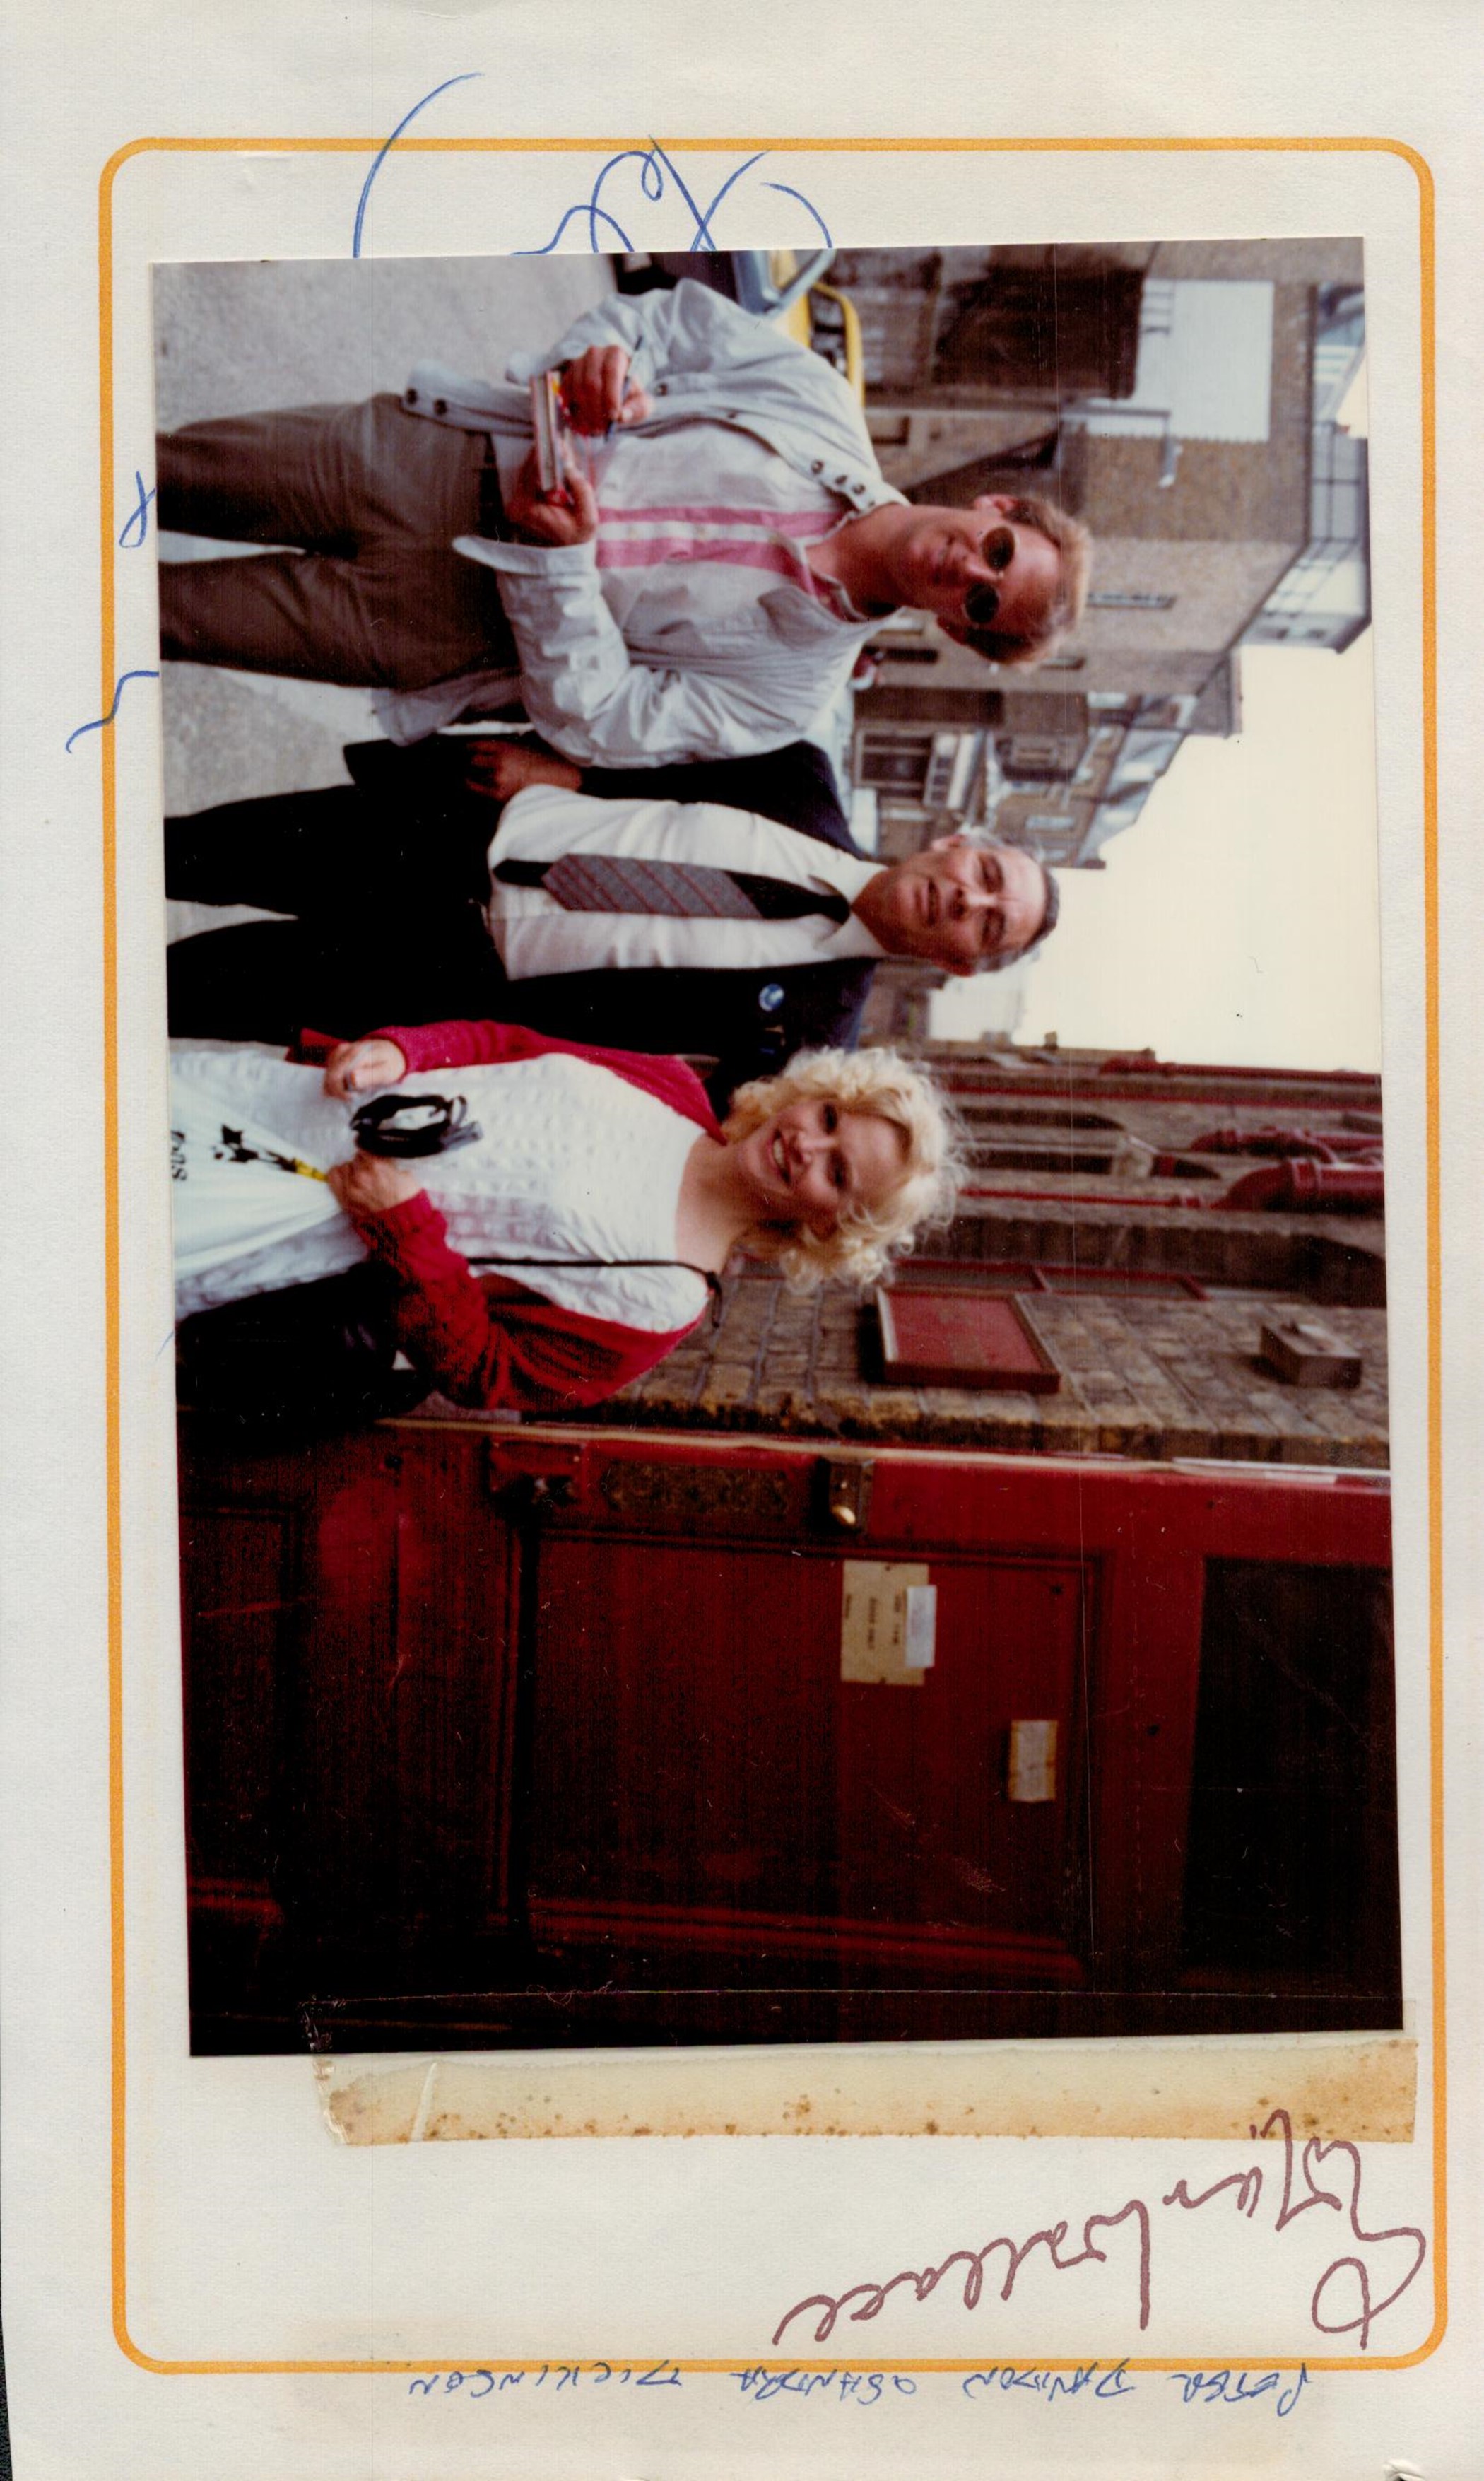 Peter Davidson and Sandra Dickinson 8x5 signed album page accompanied by an attached candid colour